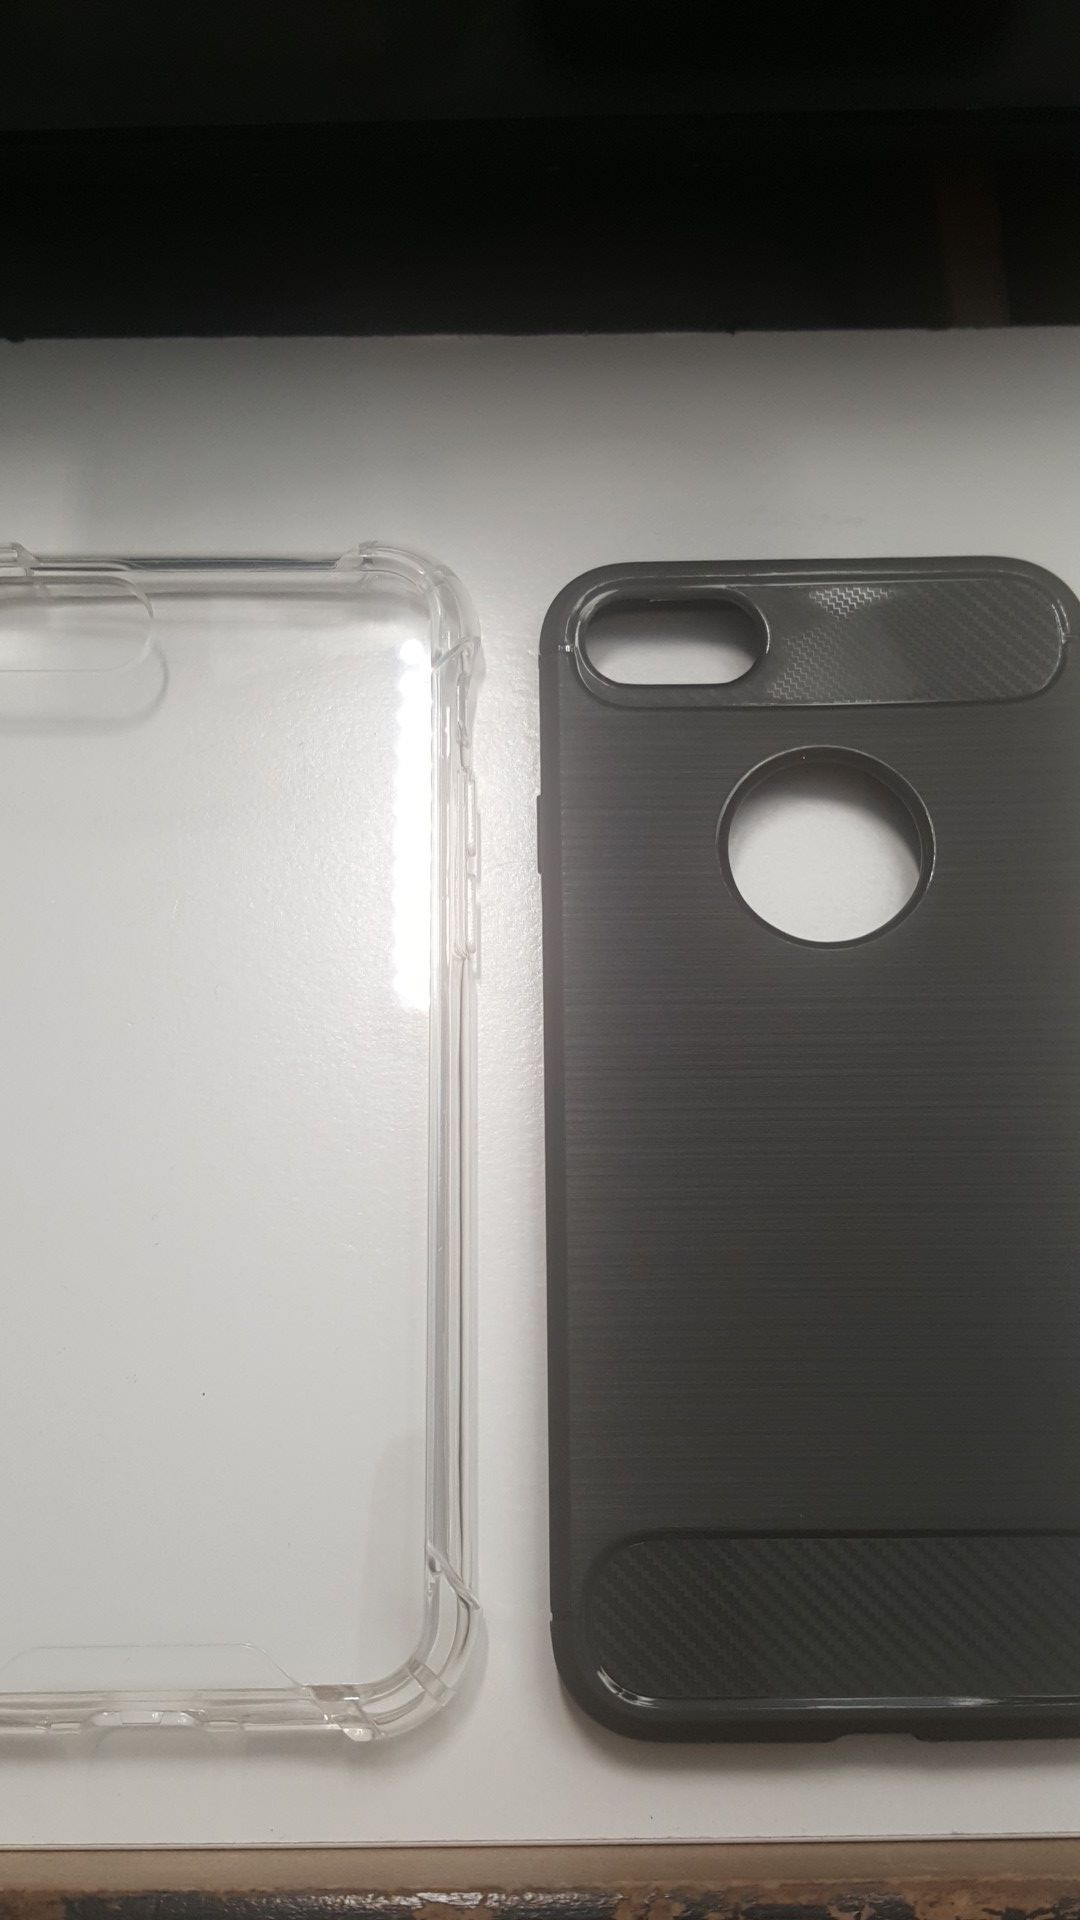 2 cases for iphone 7/8 4.7" not plus 1clear,1grayblack new 7firm shiping only